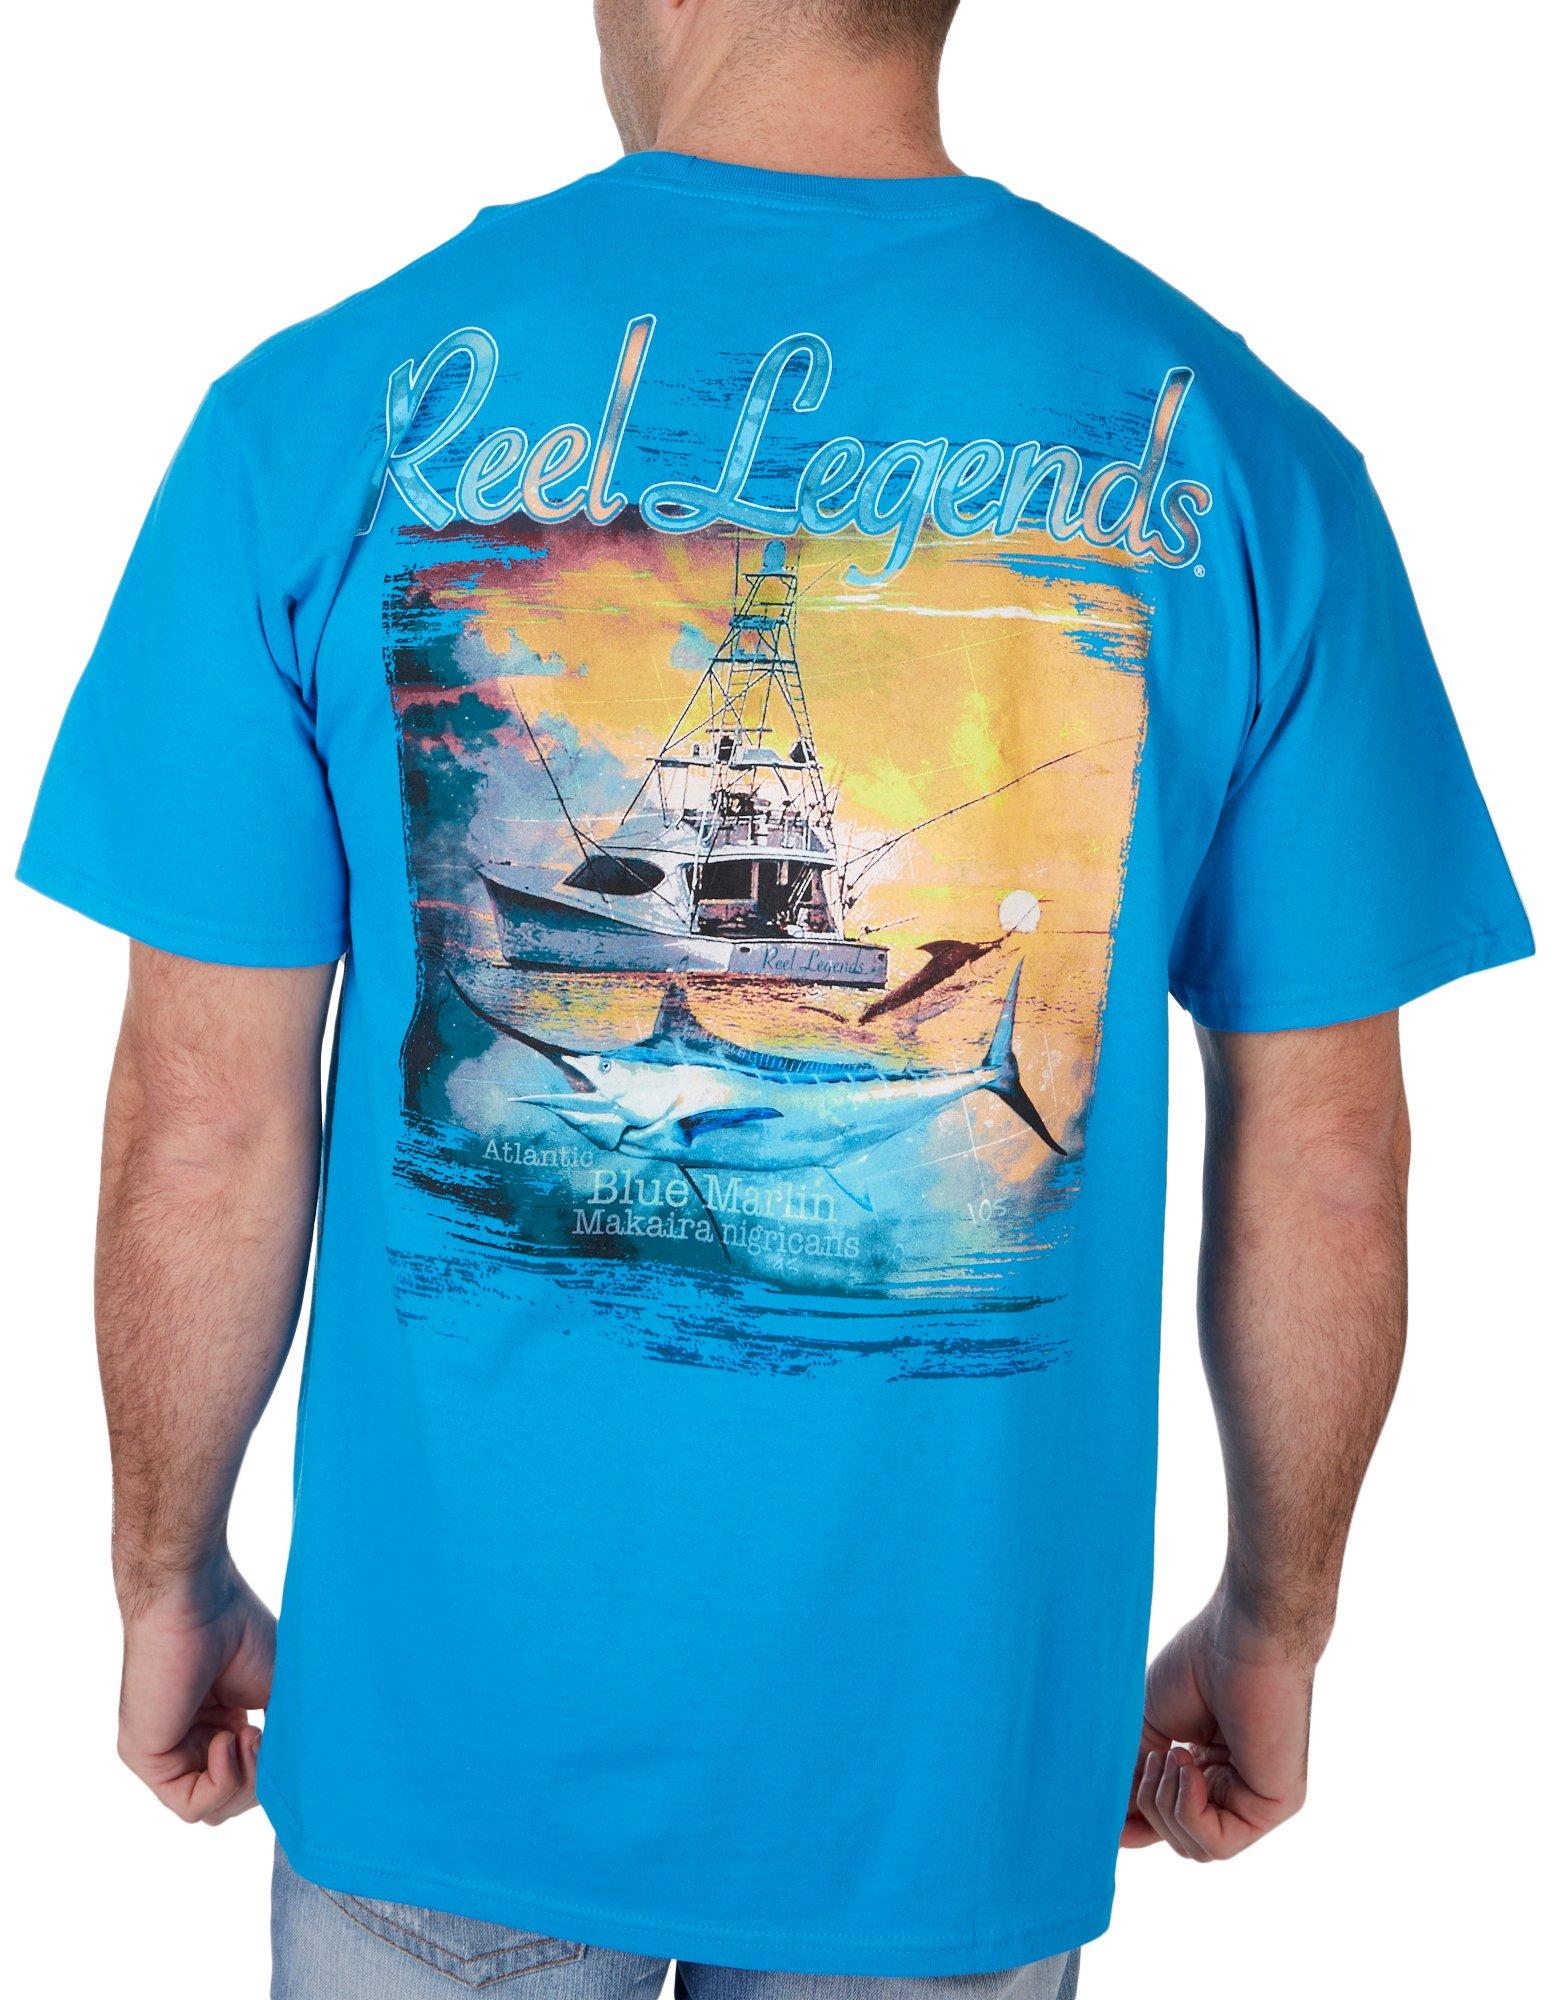 Save on Reel Legends® for the family - Bealls Florida